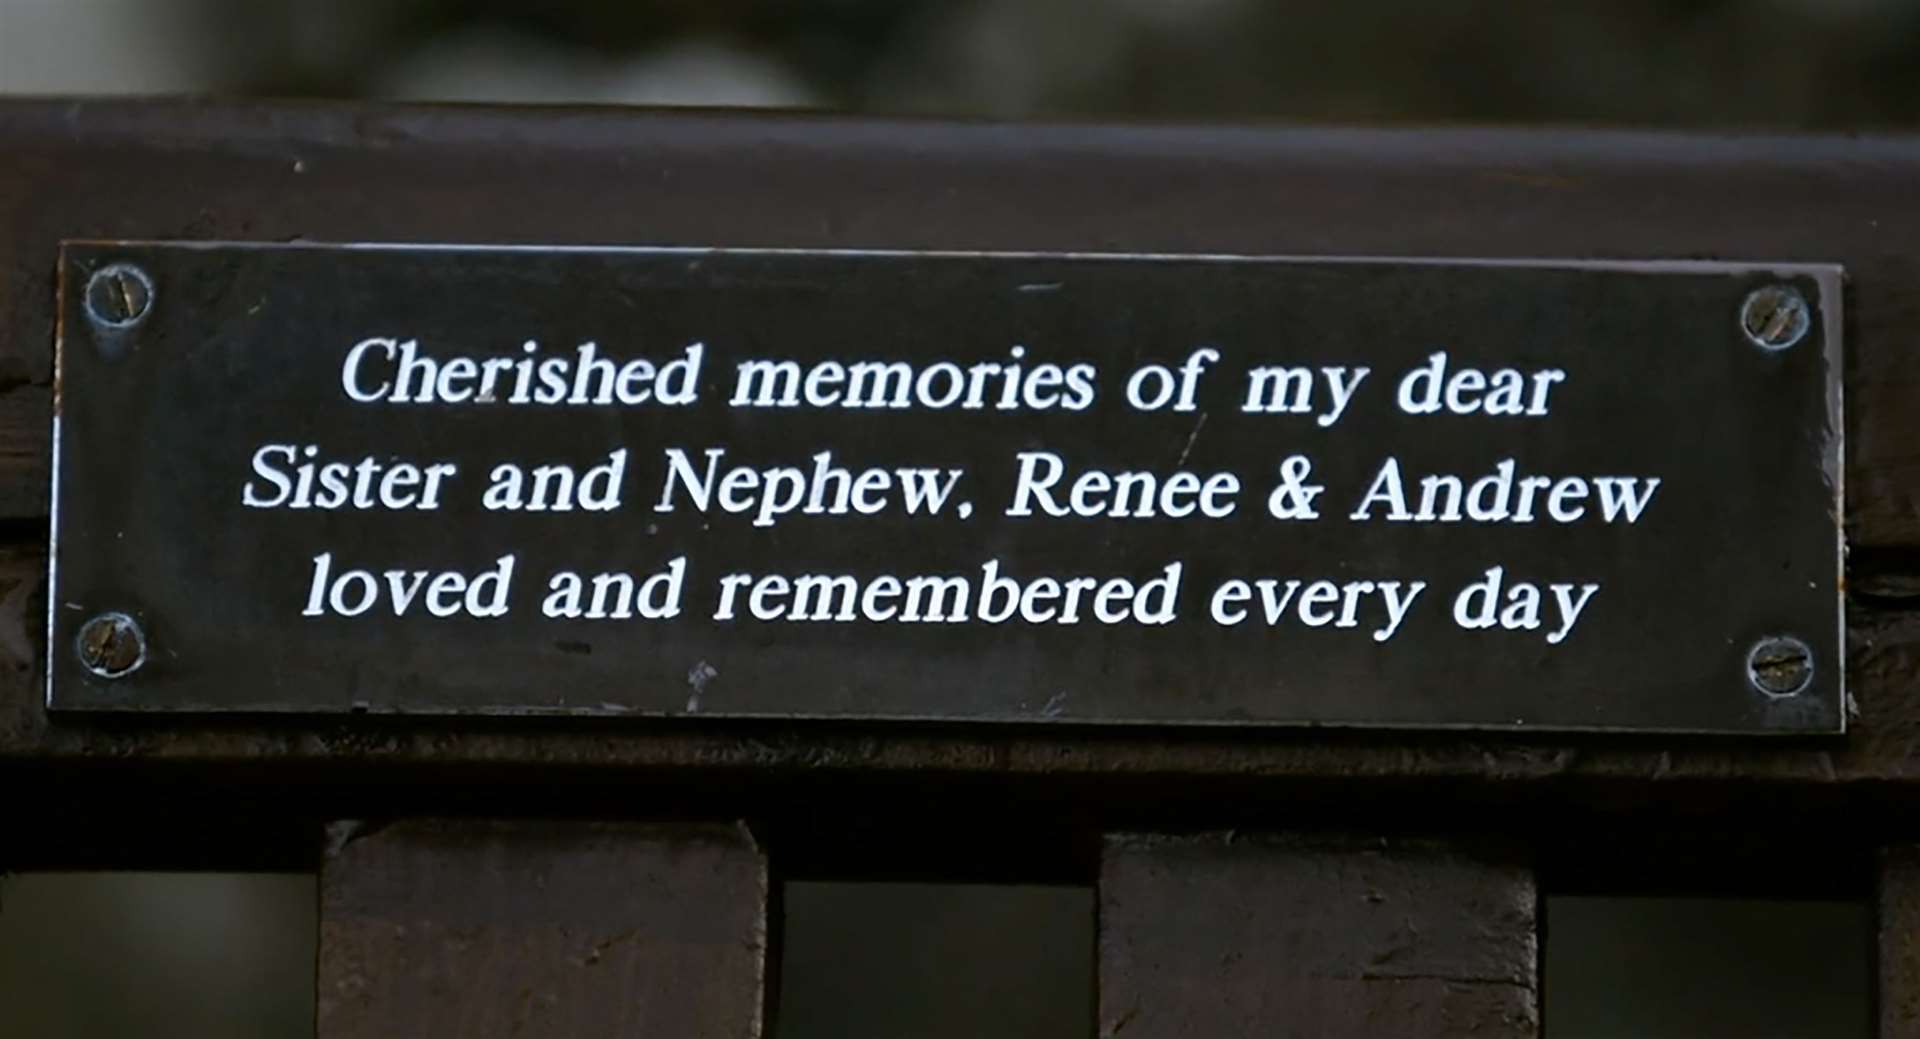 A memorial plaque for Renee and Andrew MacRae.